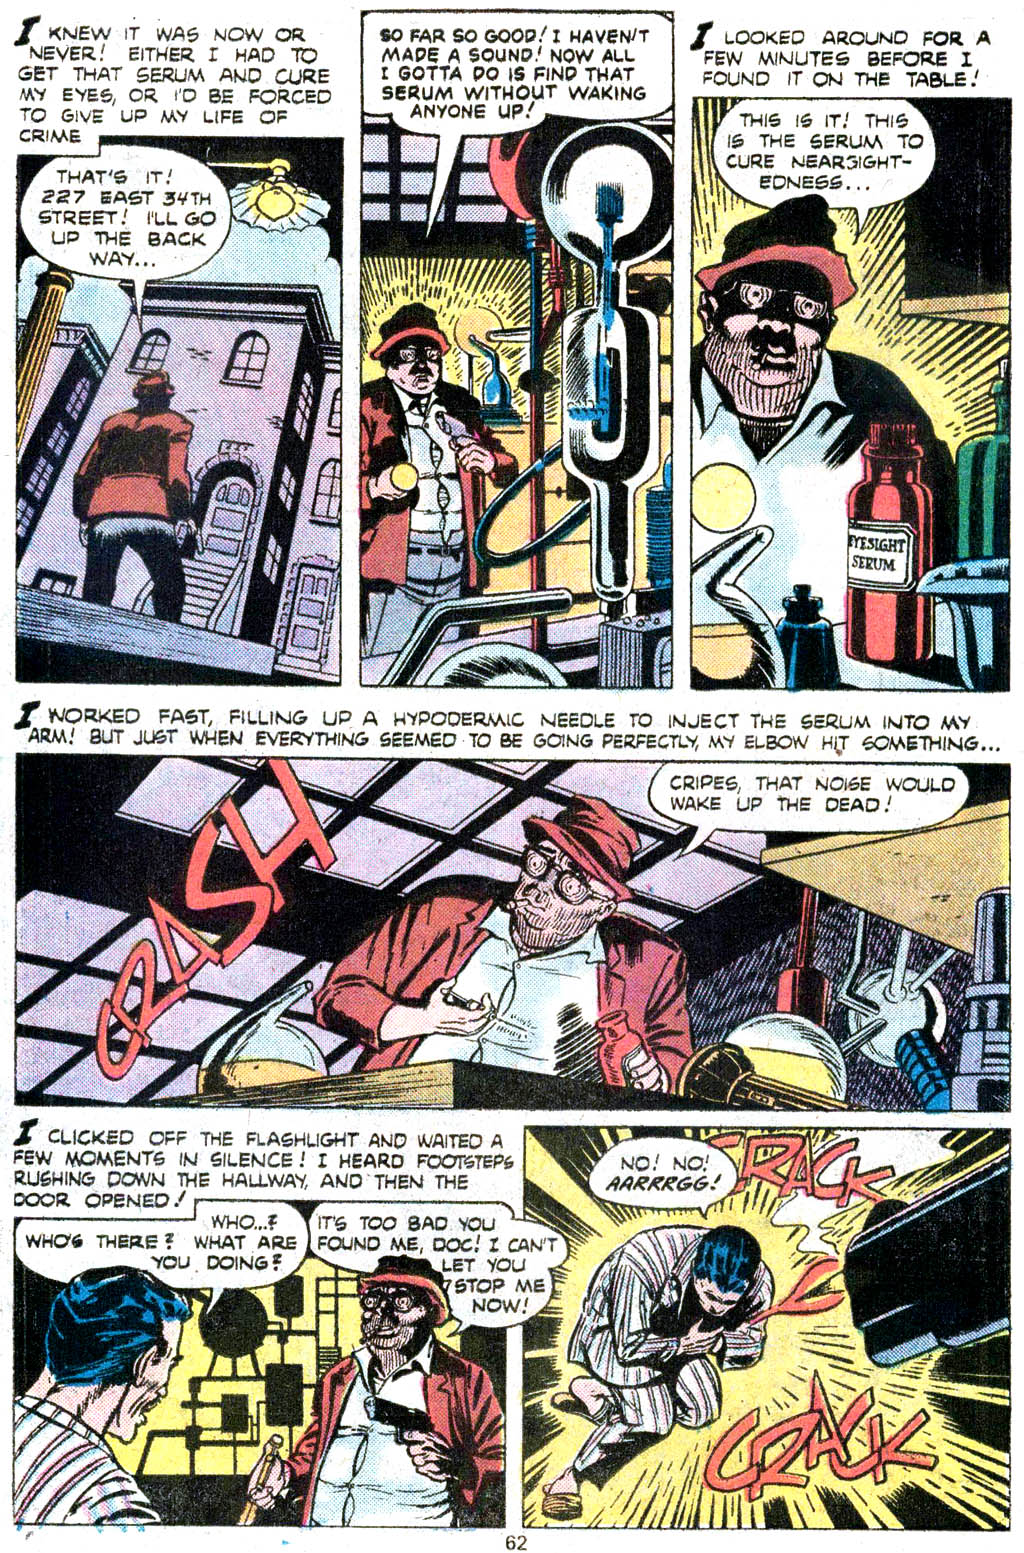 Marvel Tales (1949) 109 Page 3